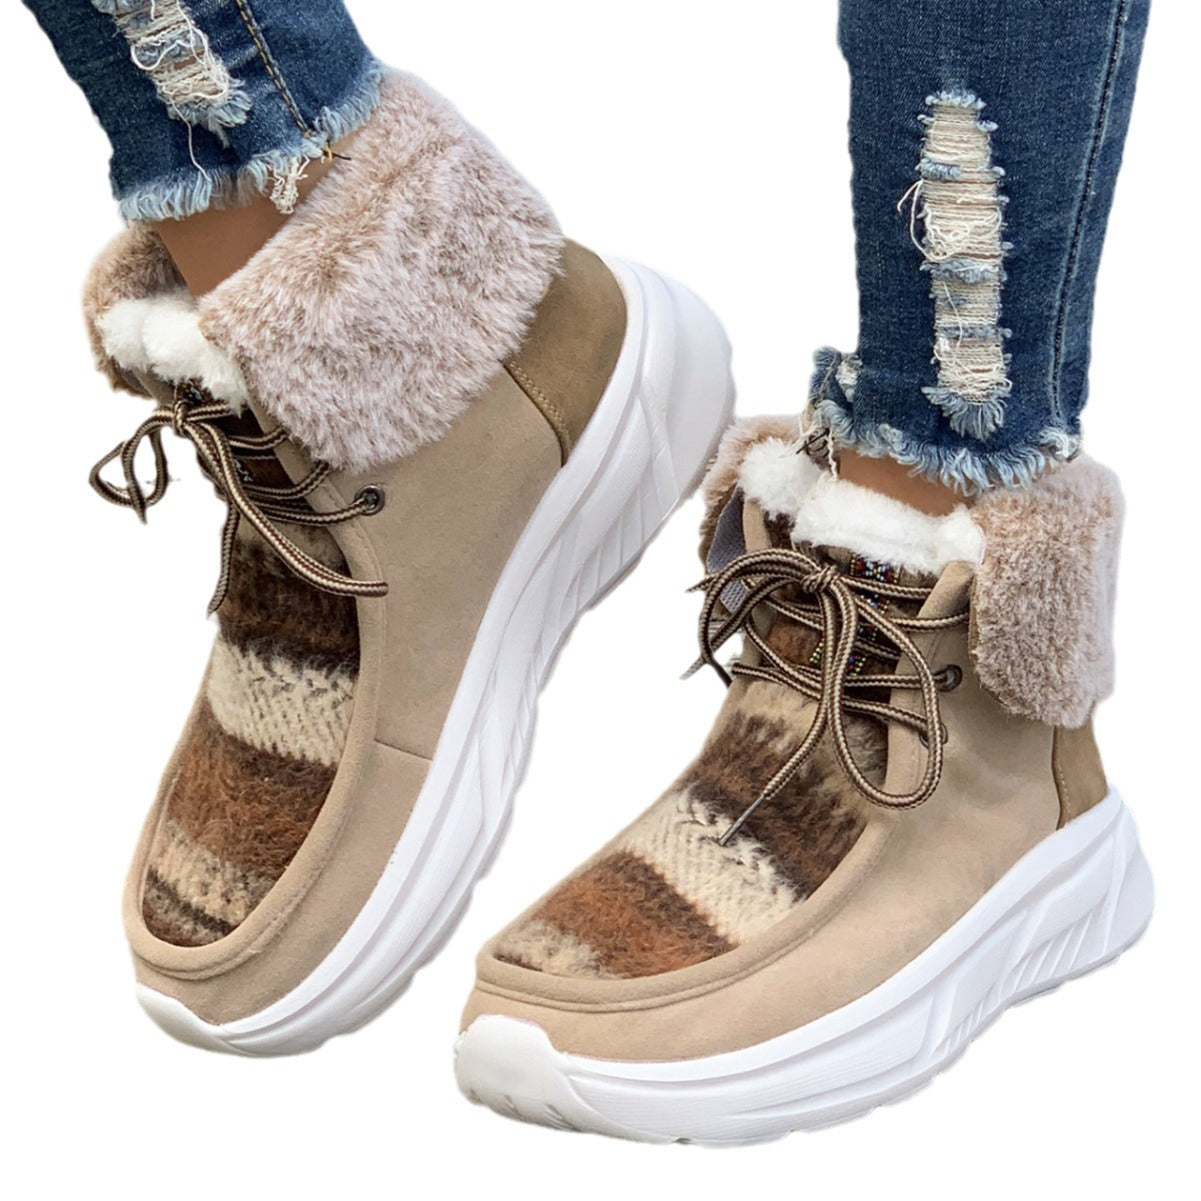 Beige Fuzzy Thermal Lined Non-slip Lace-up Plush Women's Snow Boots - 3 colors - women's boots at TFC&H Co.